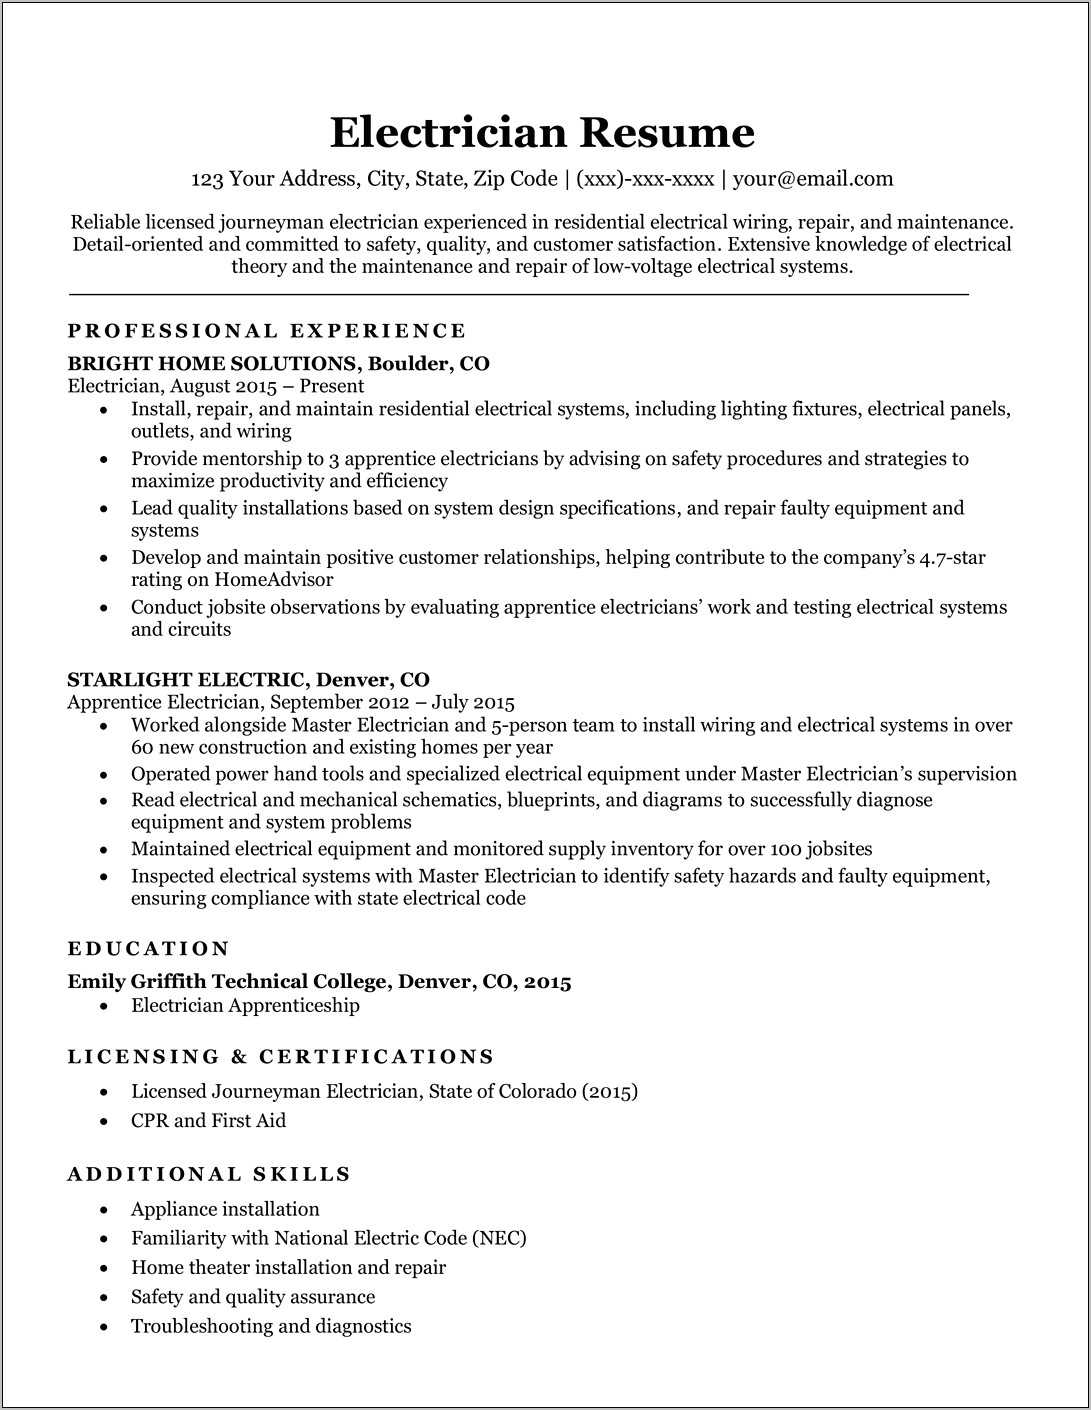 Sample Resumes For People.over 60 